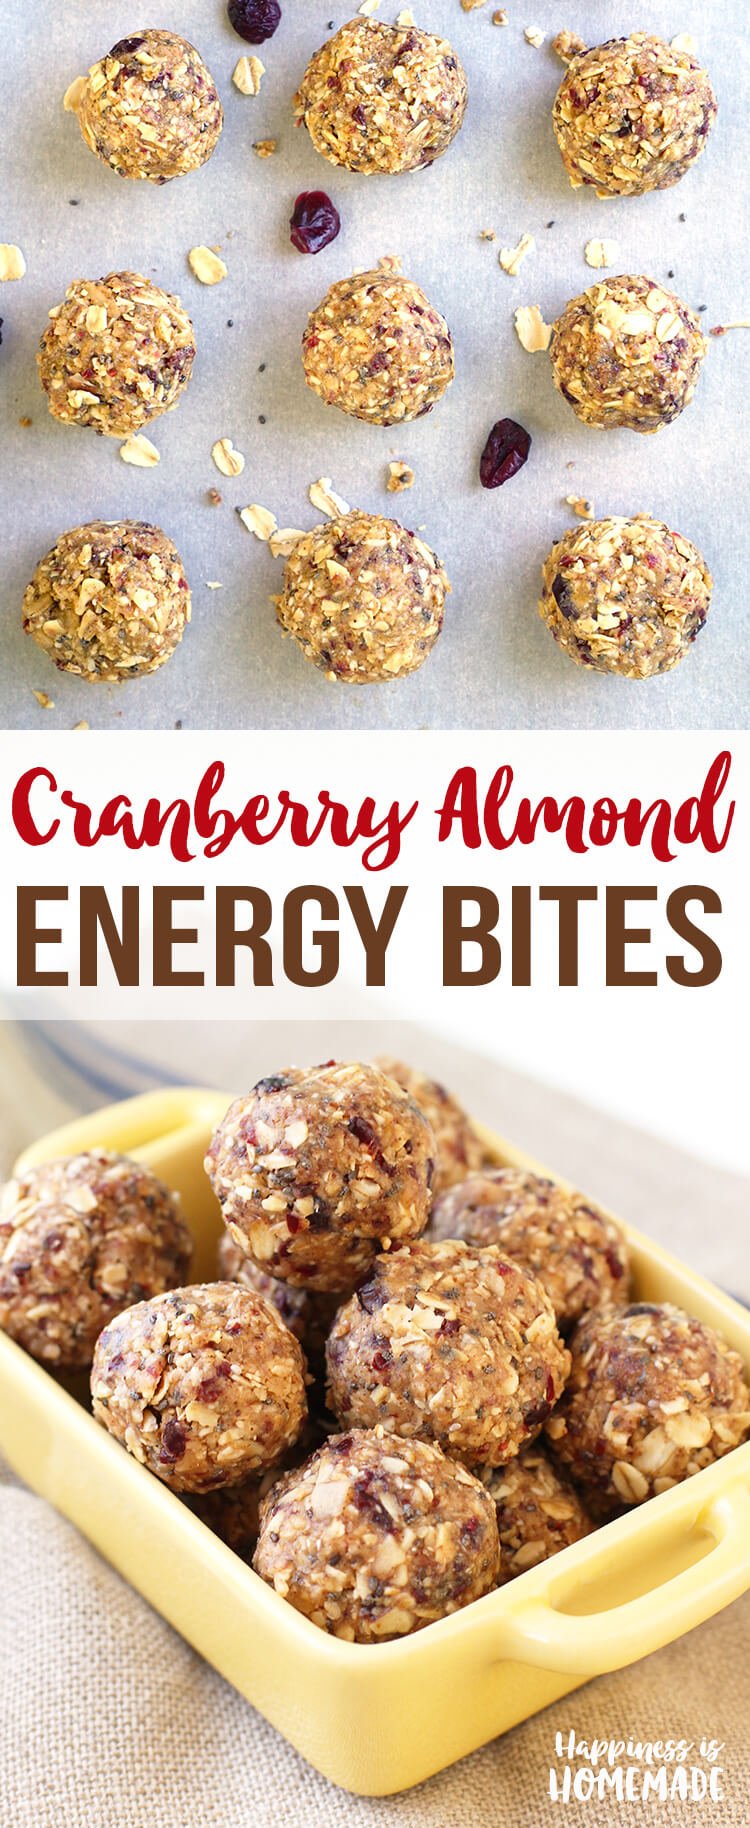 Cranberry Almond Energy Bites are Healthy and Delicious